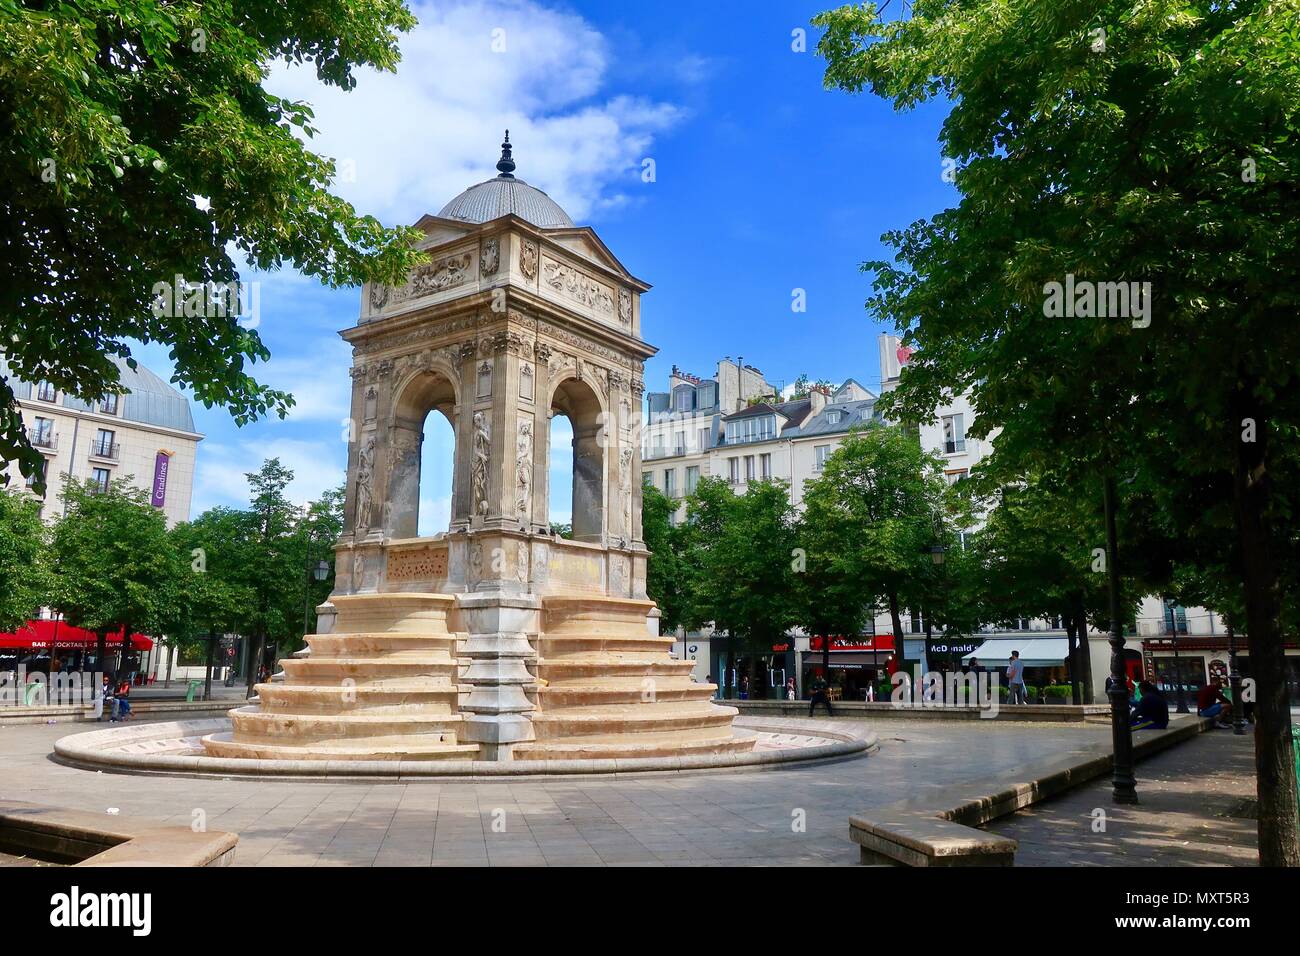 Paris, France. Hot bright sunny spring day, May 2018. Fontaine des Innocents in Les Halles. Stock Photo